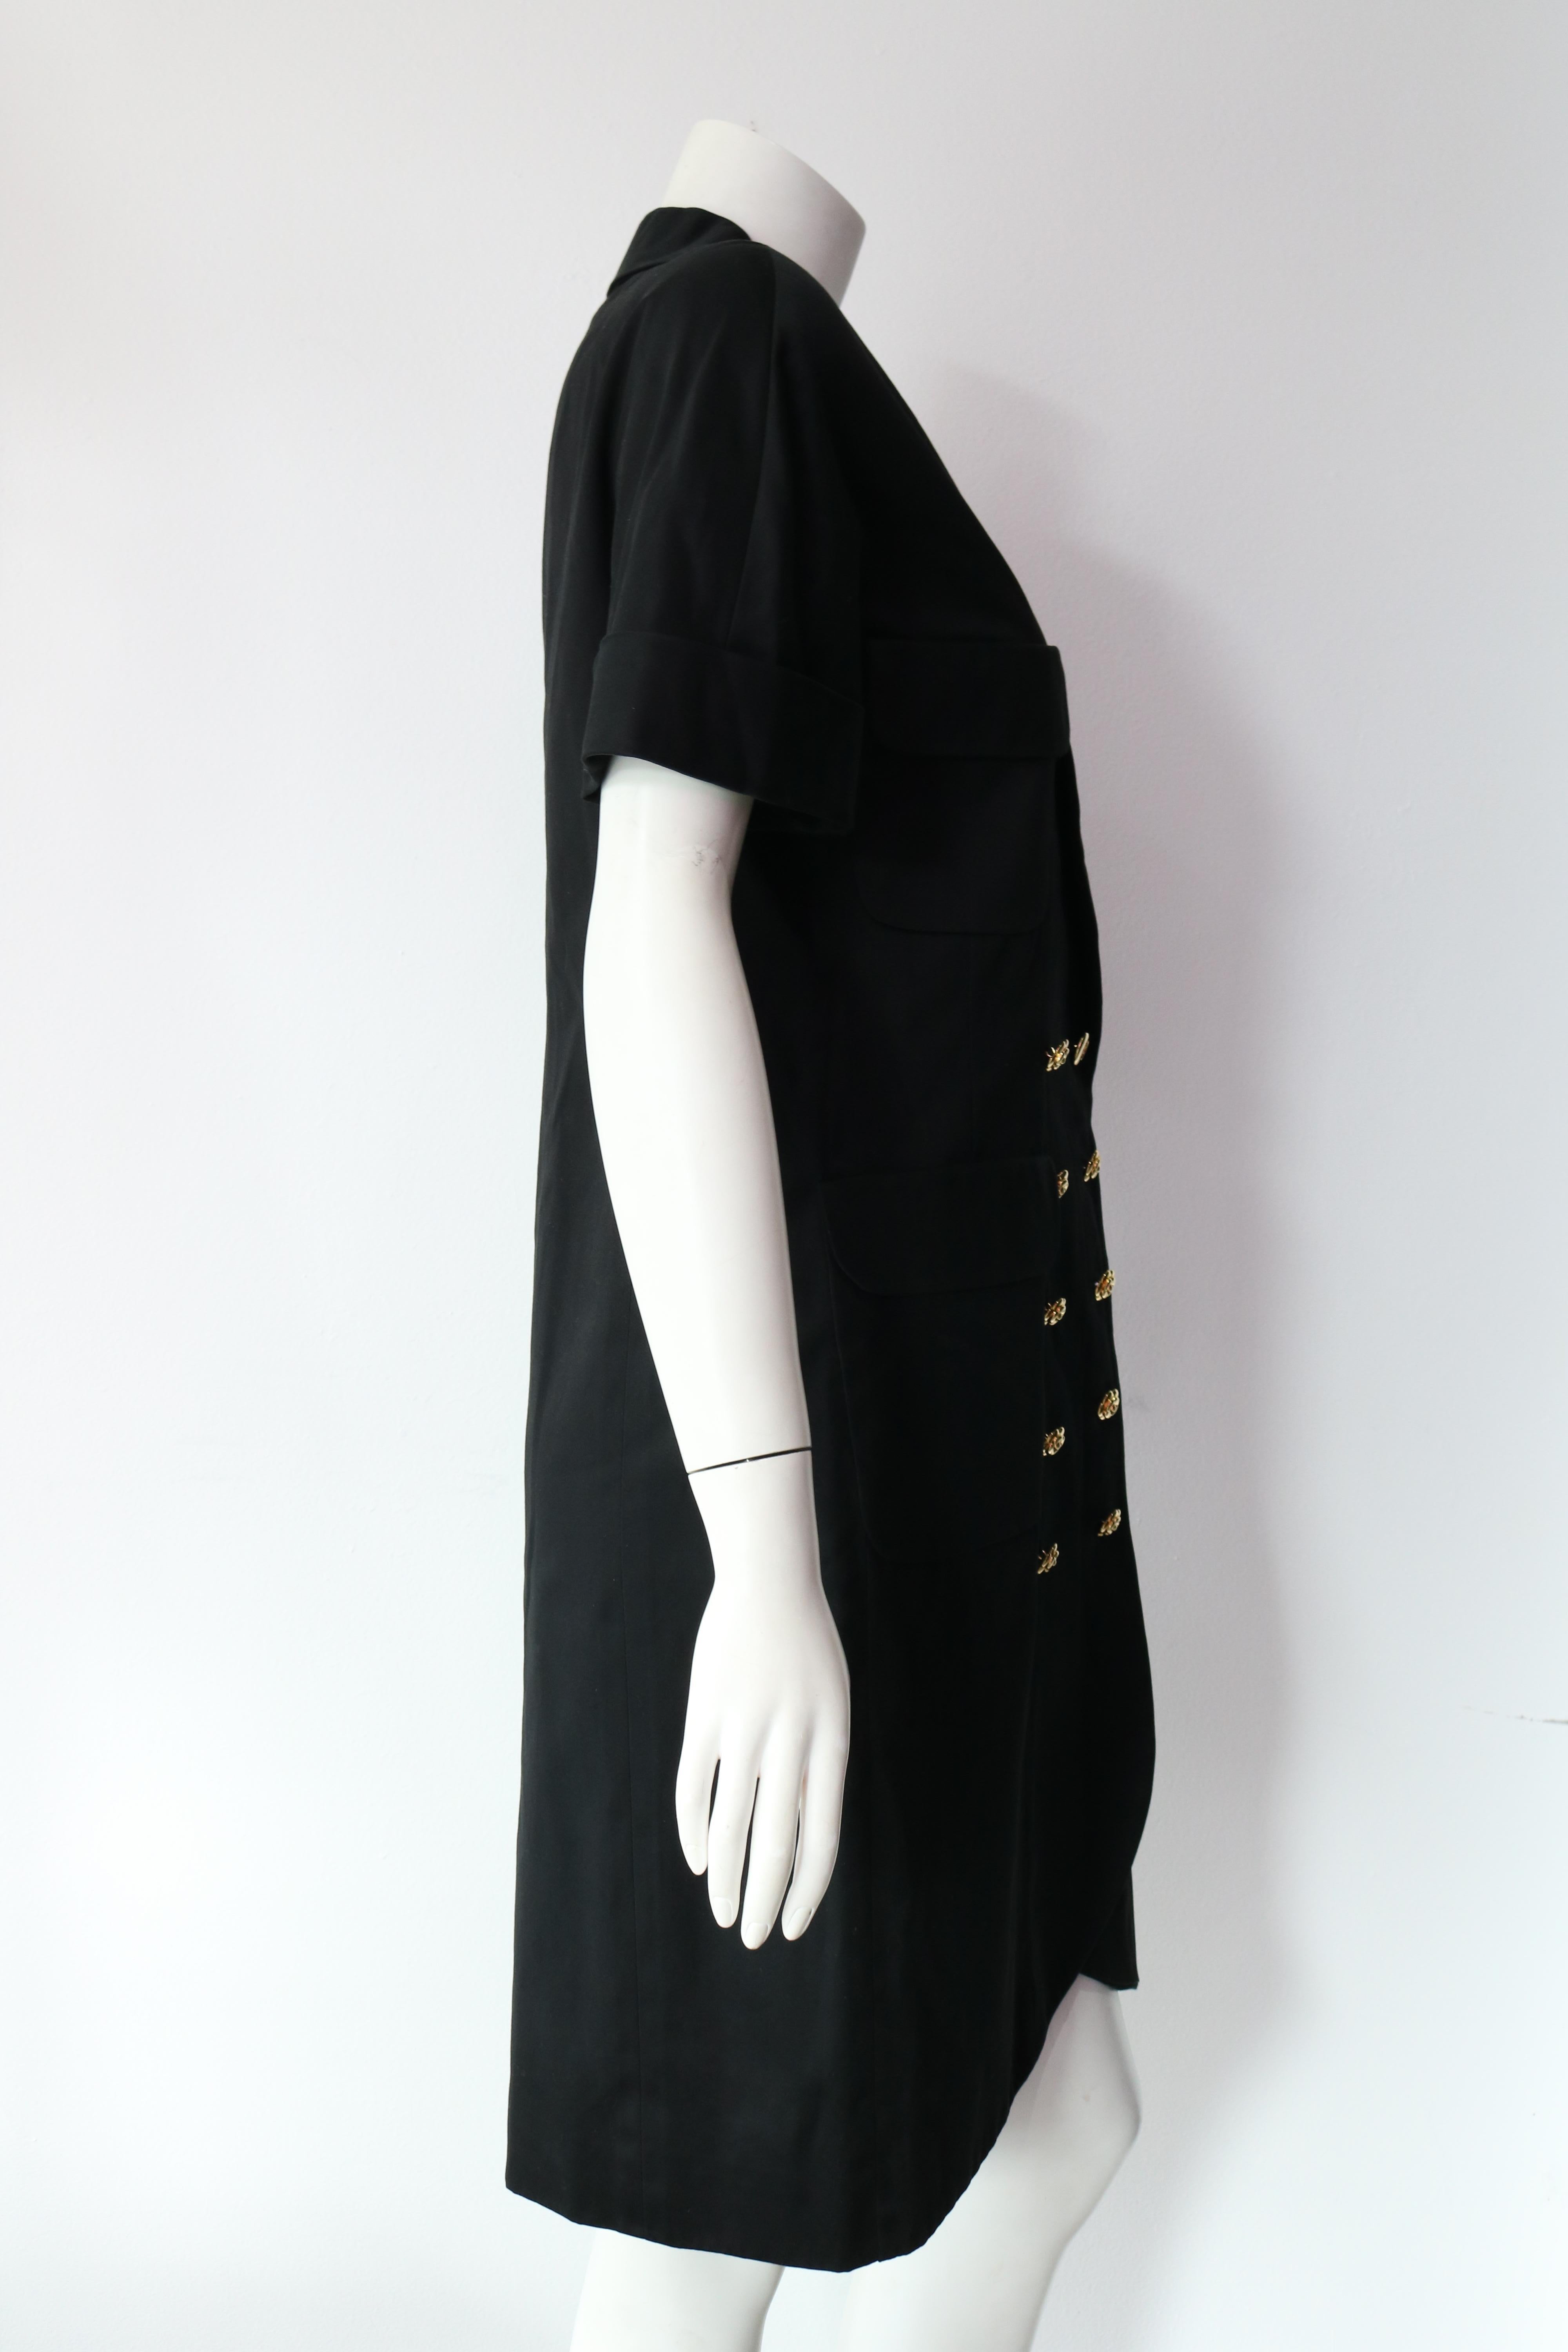 Chanel Black Suit Dress  In Good Condition For Sale In Thousand Oaks, CA